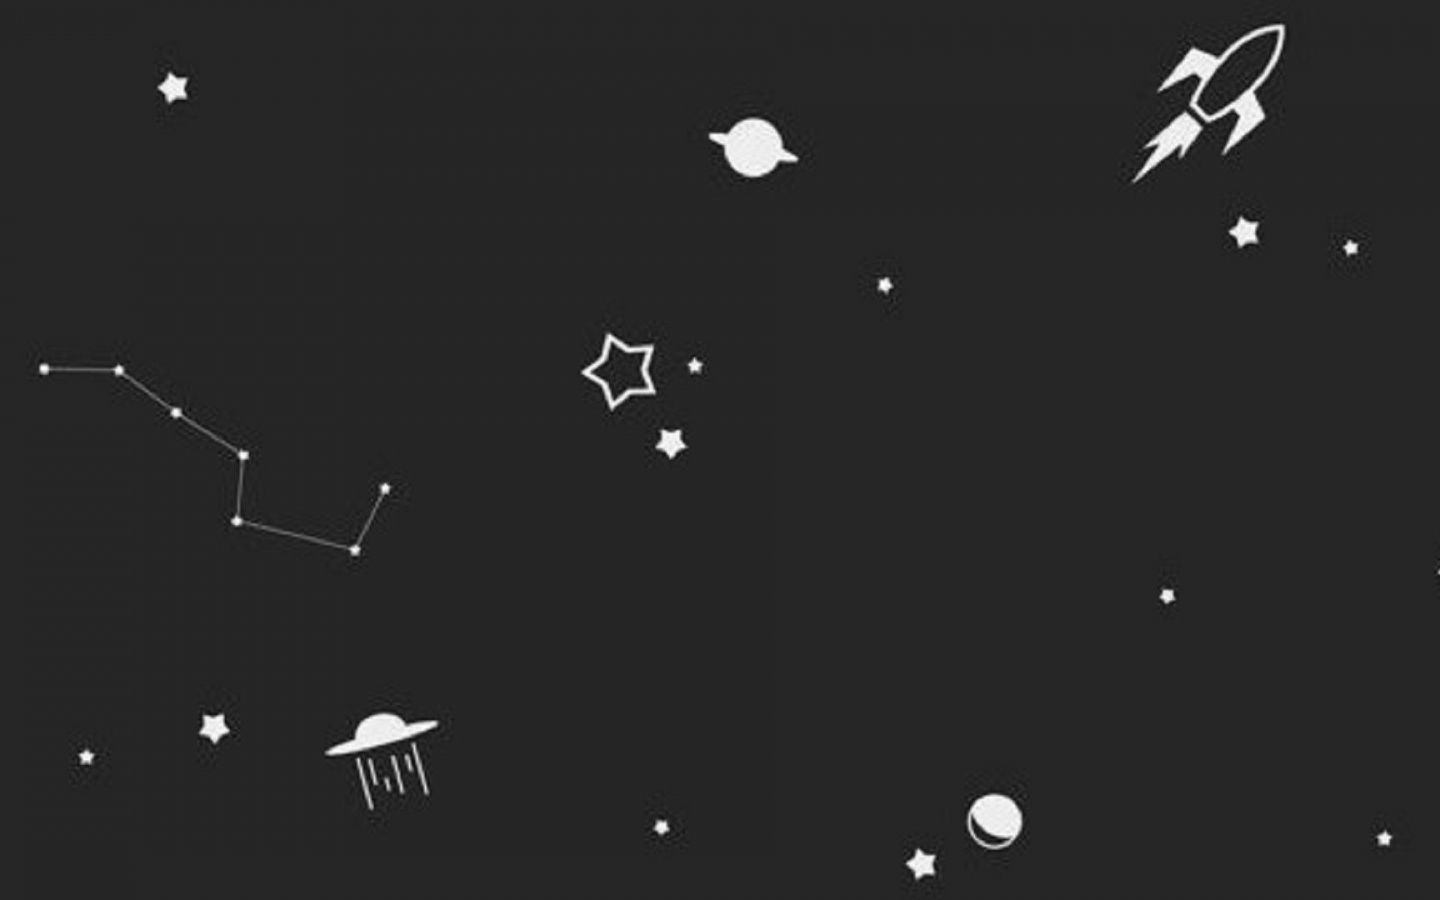 A black background with white stars and planets - Gray, 1440x900